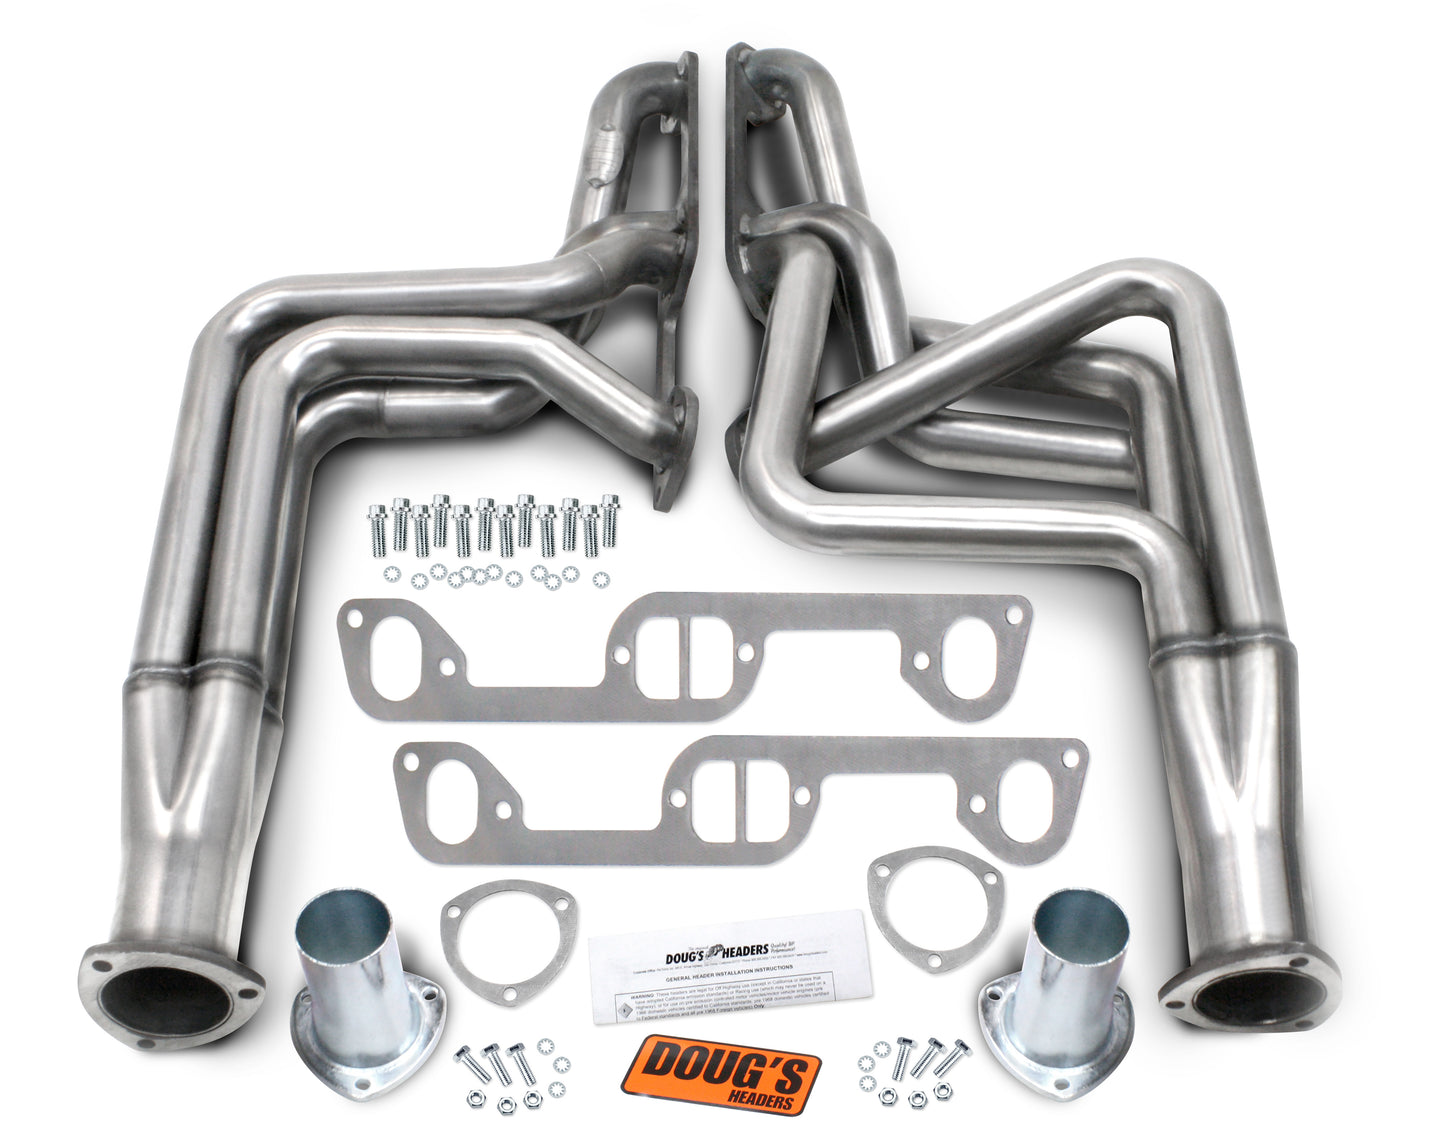 Doug's Headers D570-SS 304 Stainless Long Tube Header 70-81 Firebird 326-455 1 3/4" Primary 3" Collector